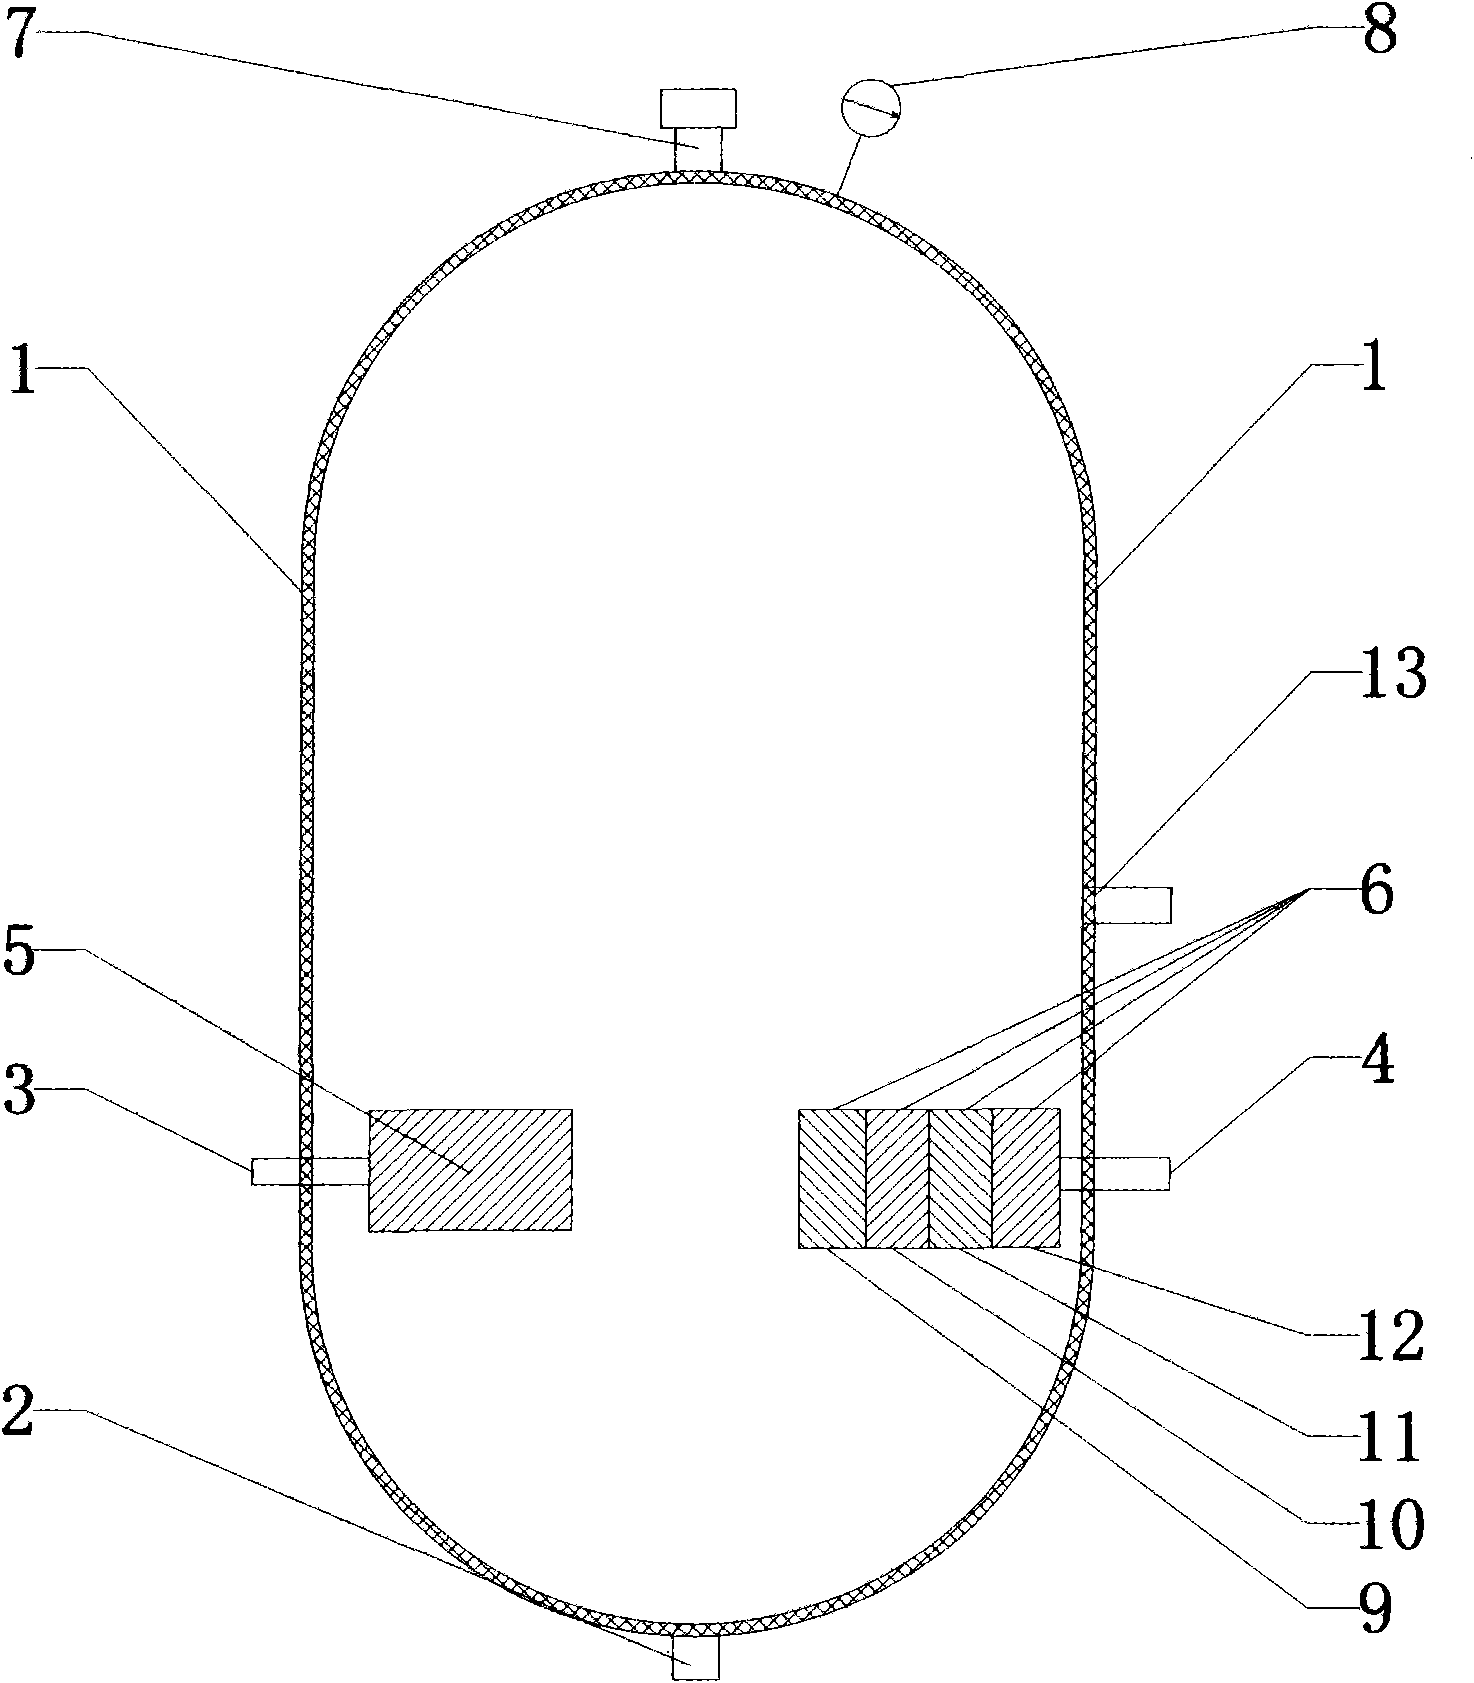 Water supply pressure container with built-in purifying and filtering device